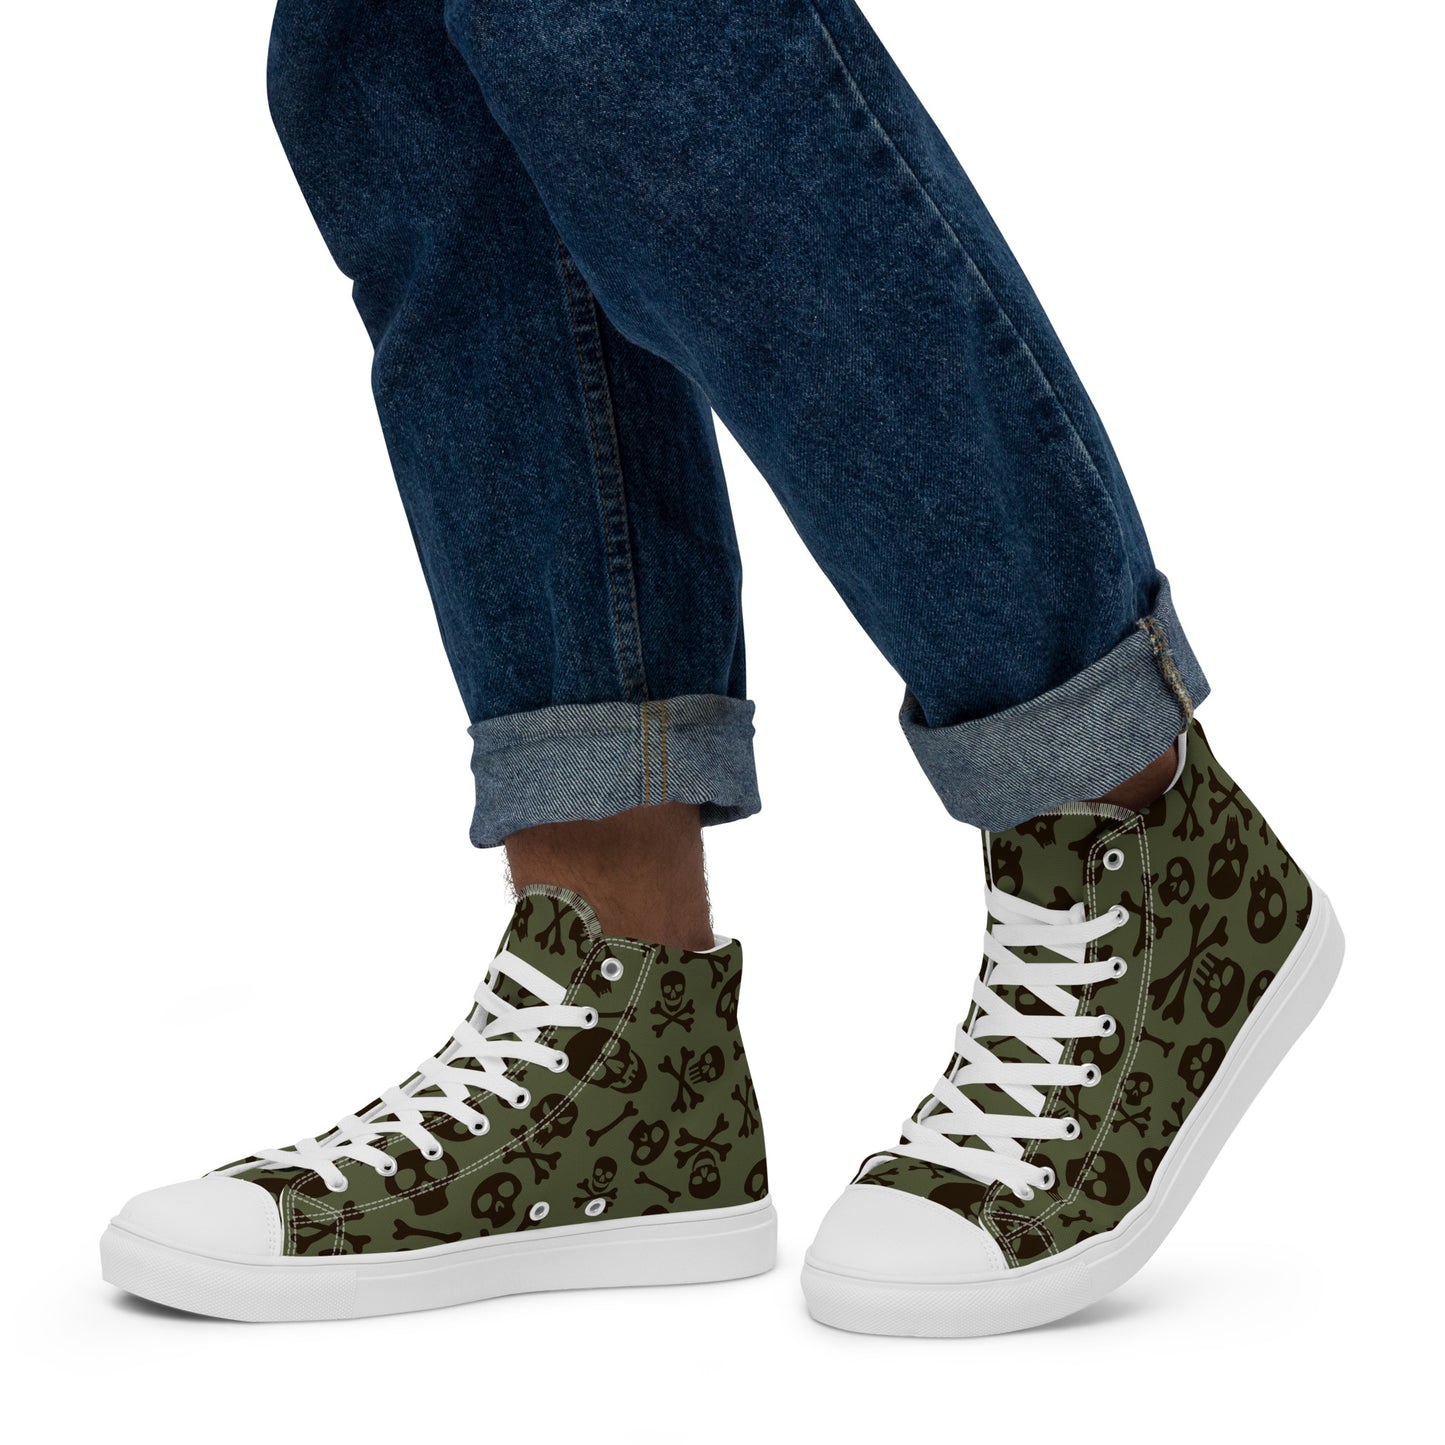 Skull And Crossbones - Men’s high top canvas shoes White Mens High Top Shoes